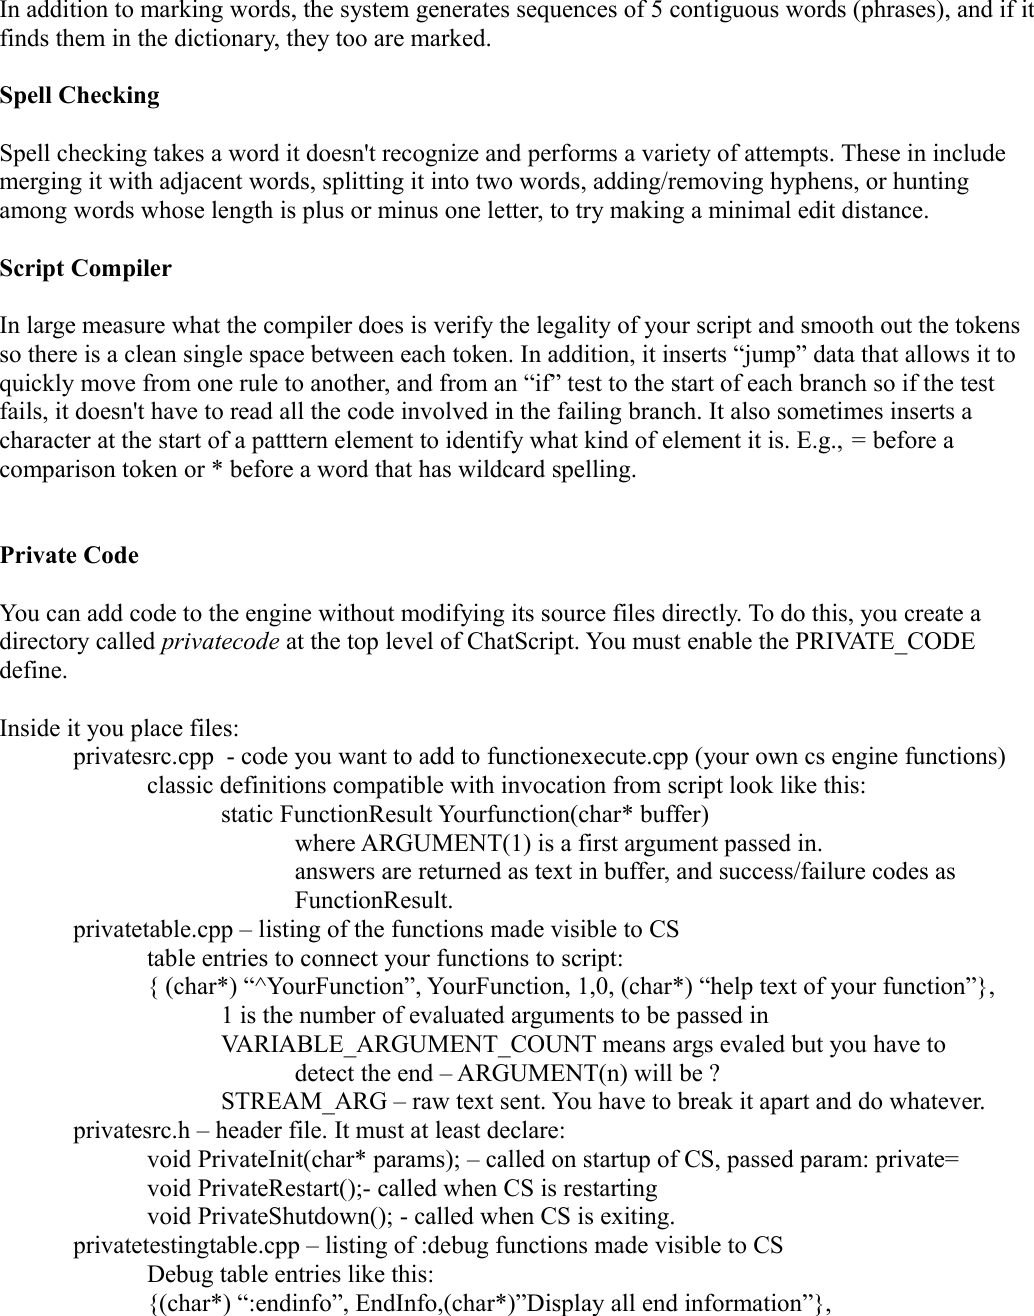 Page 4 of 5 - Chat Script Engine And Private Code Manual